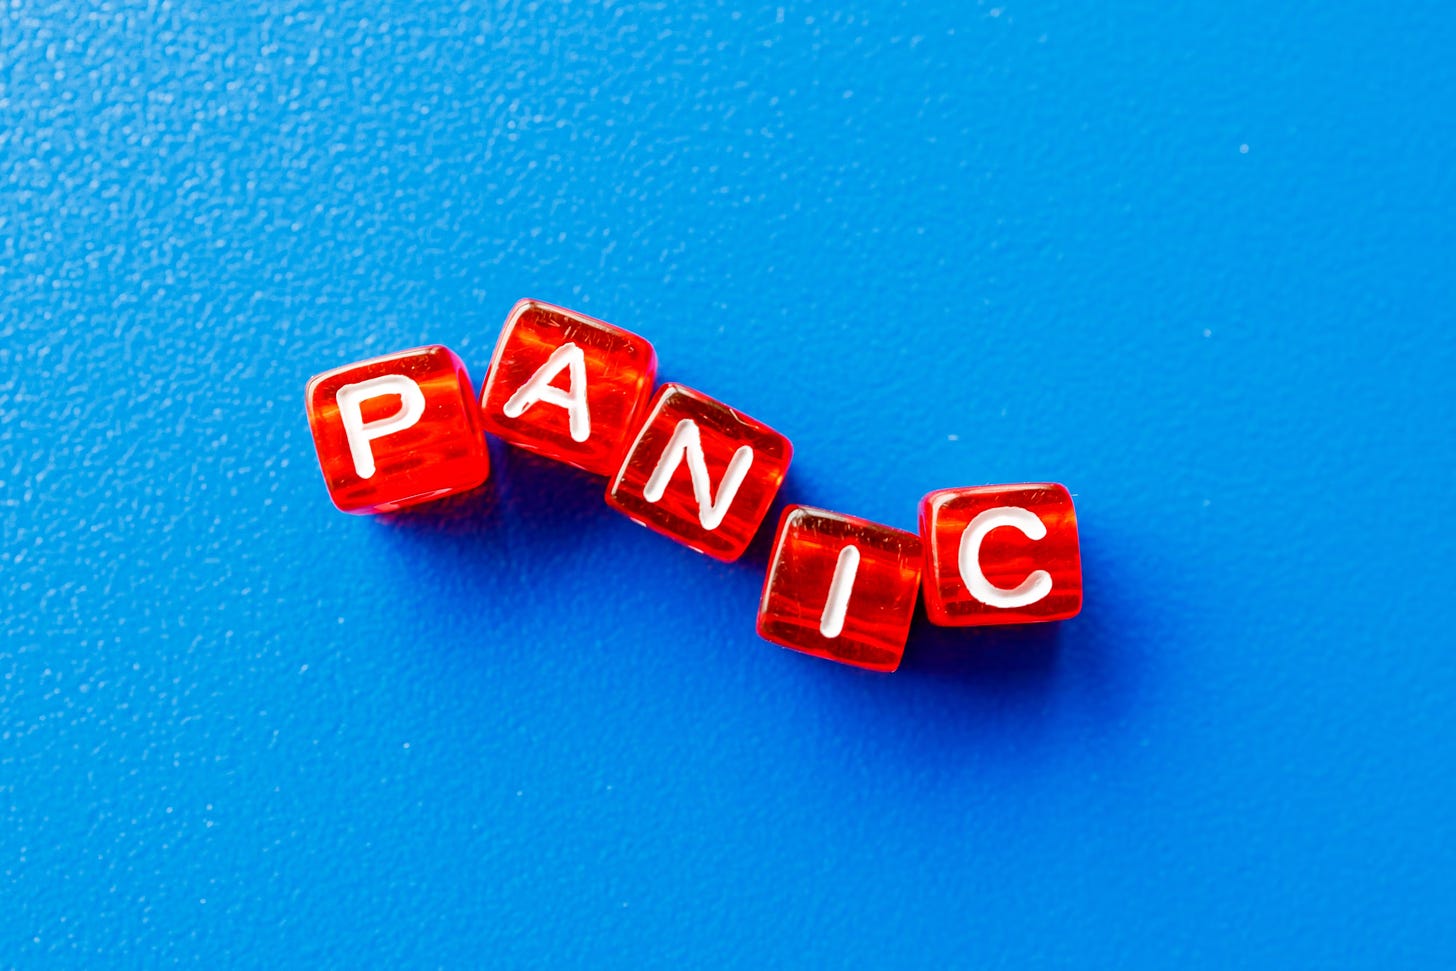 A picture from above of six red dice-like cubes with white letters on them, arranged to spell out the word "panic" in a lopsided but readable way. They are sitting on top of a blue textured background of some sort.